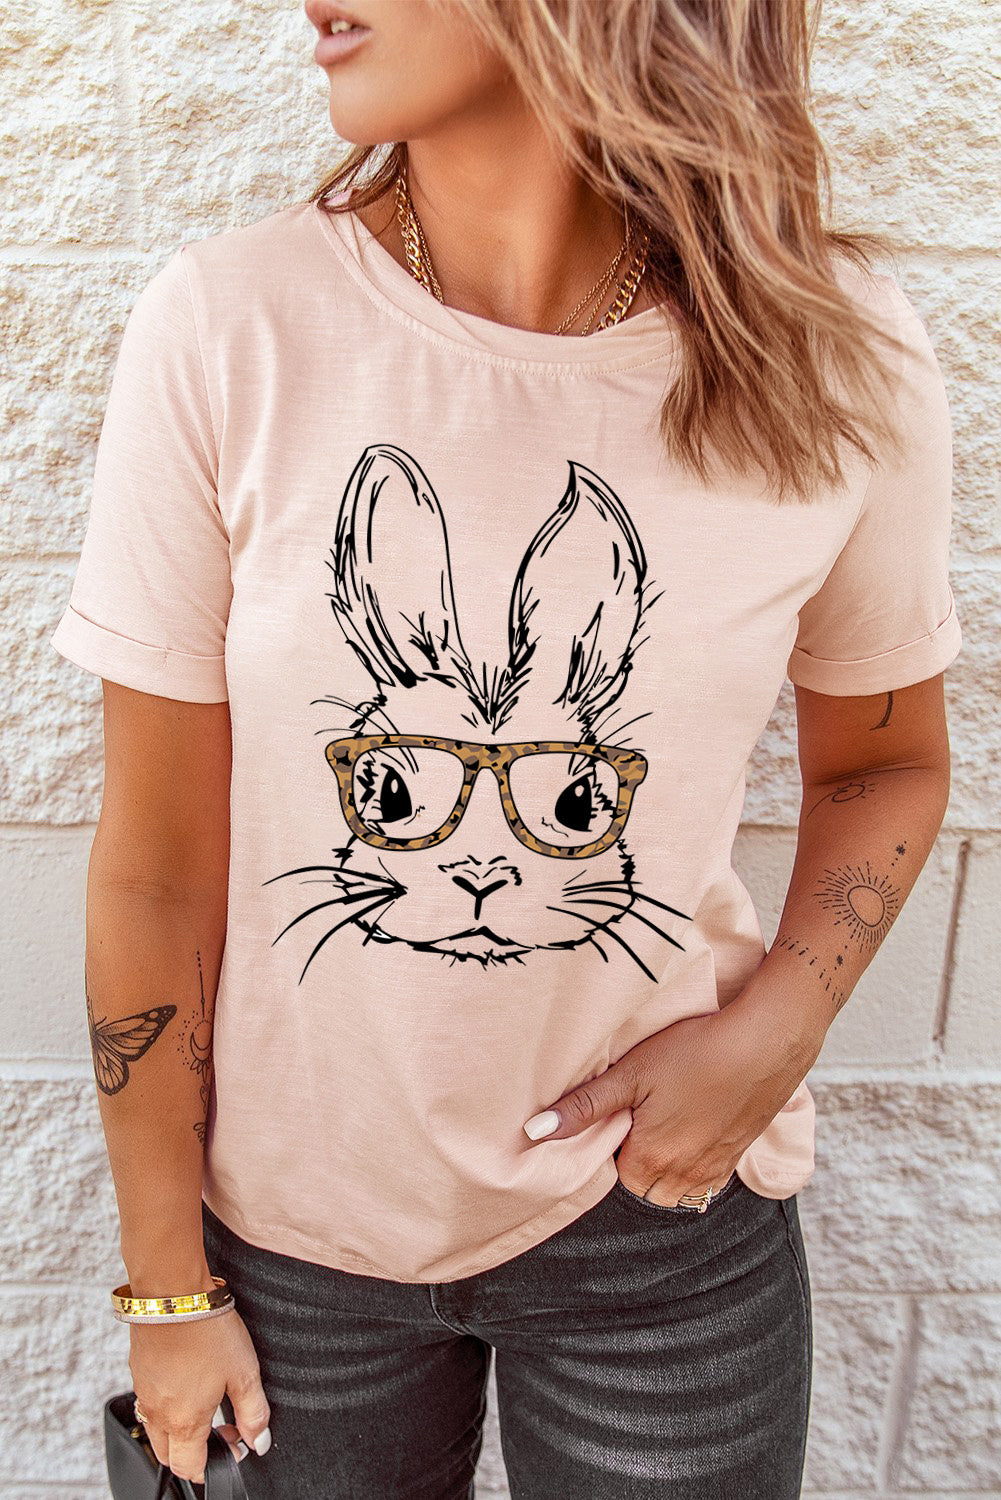 Easter Bunny Graphic Short Sleeve Tee - Pink / S - T-Shirts - Shirts & Tops - 1 - 2024